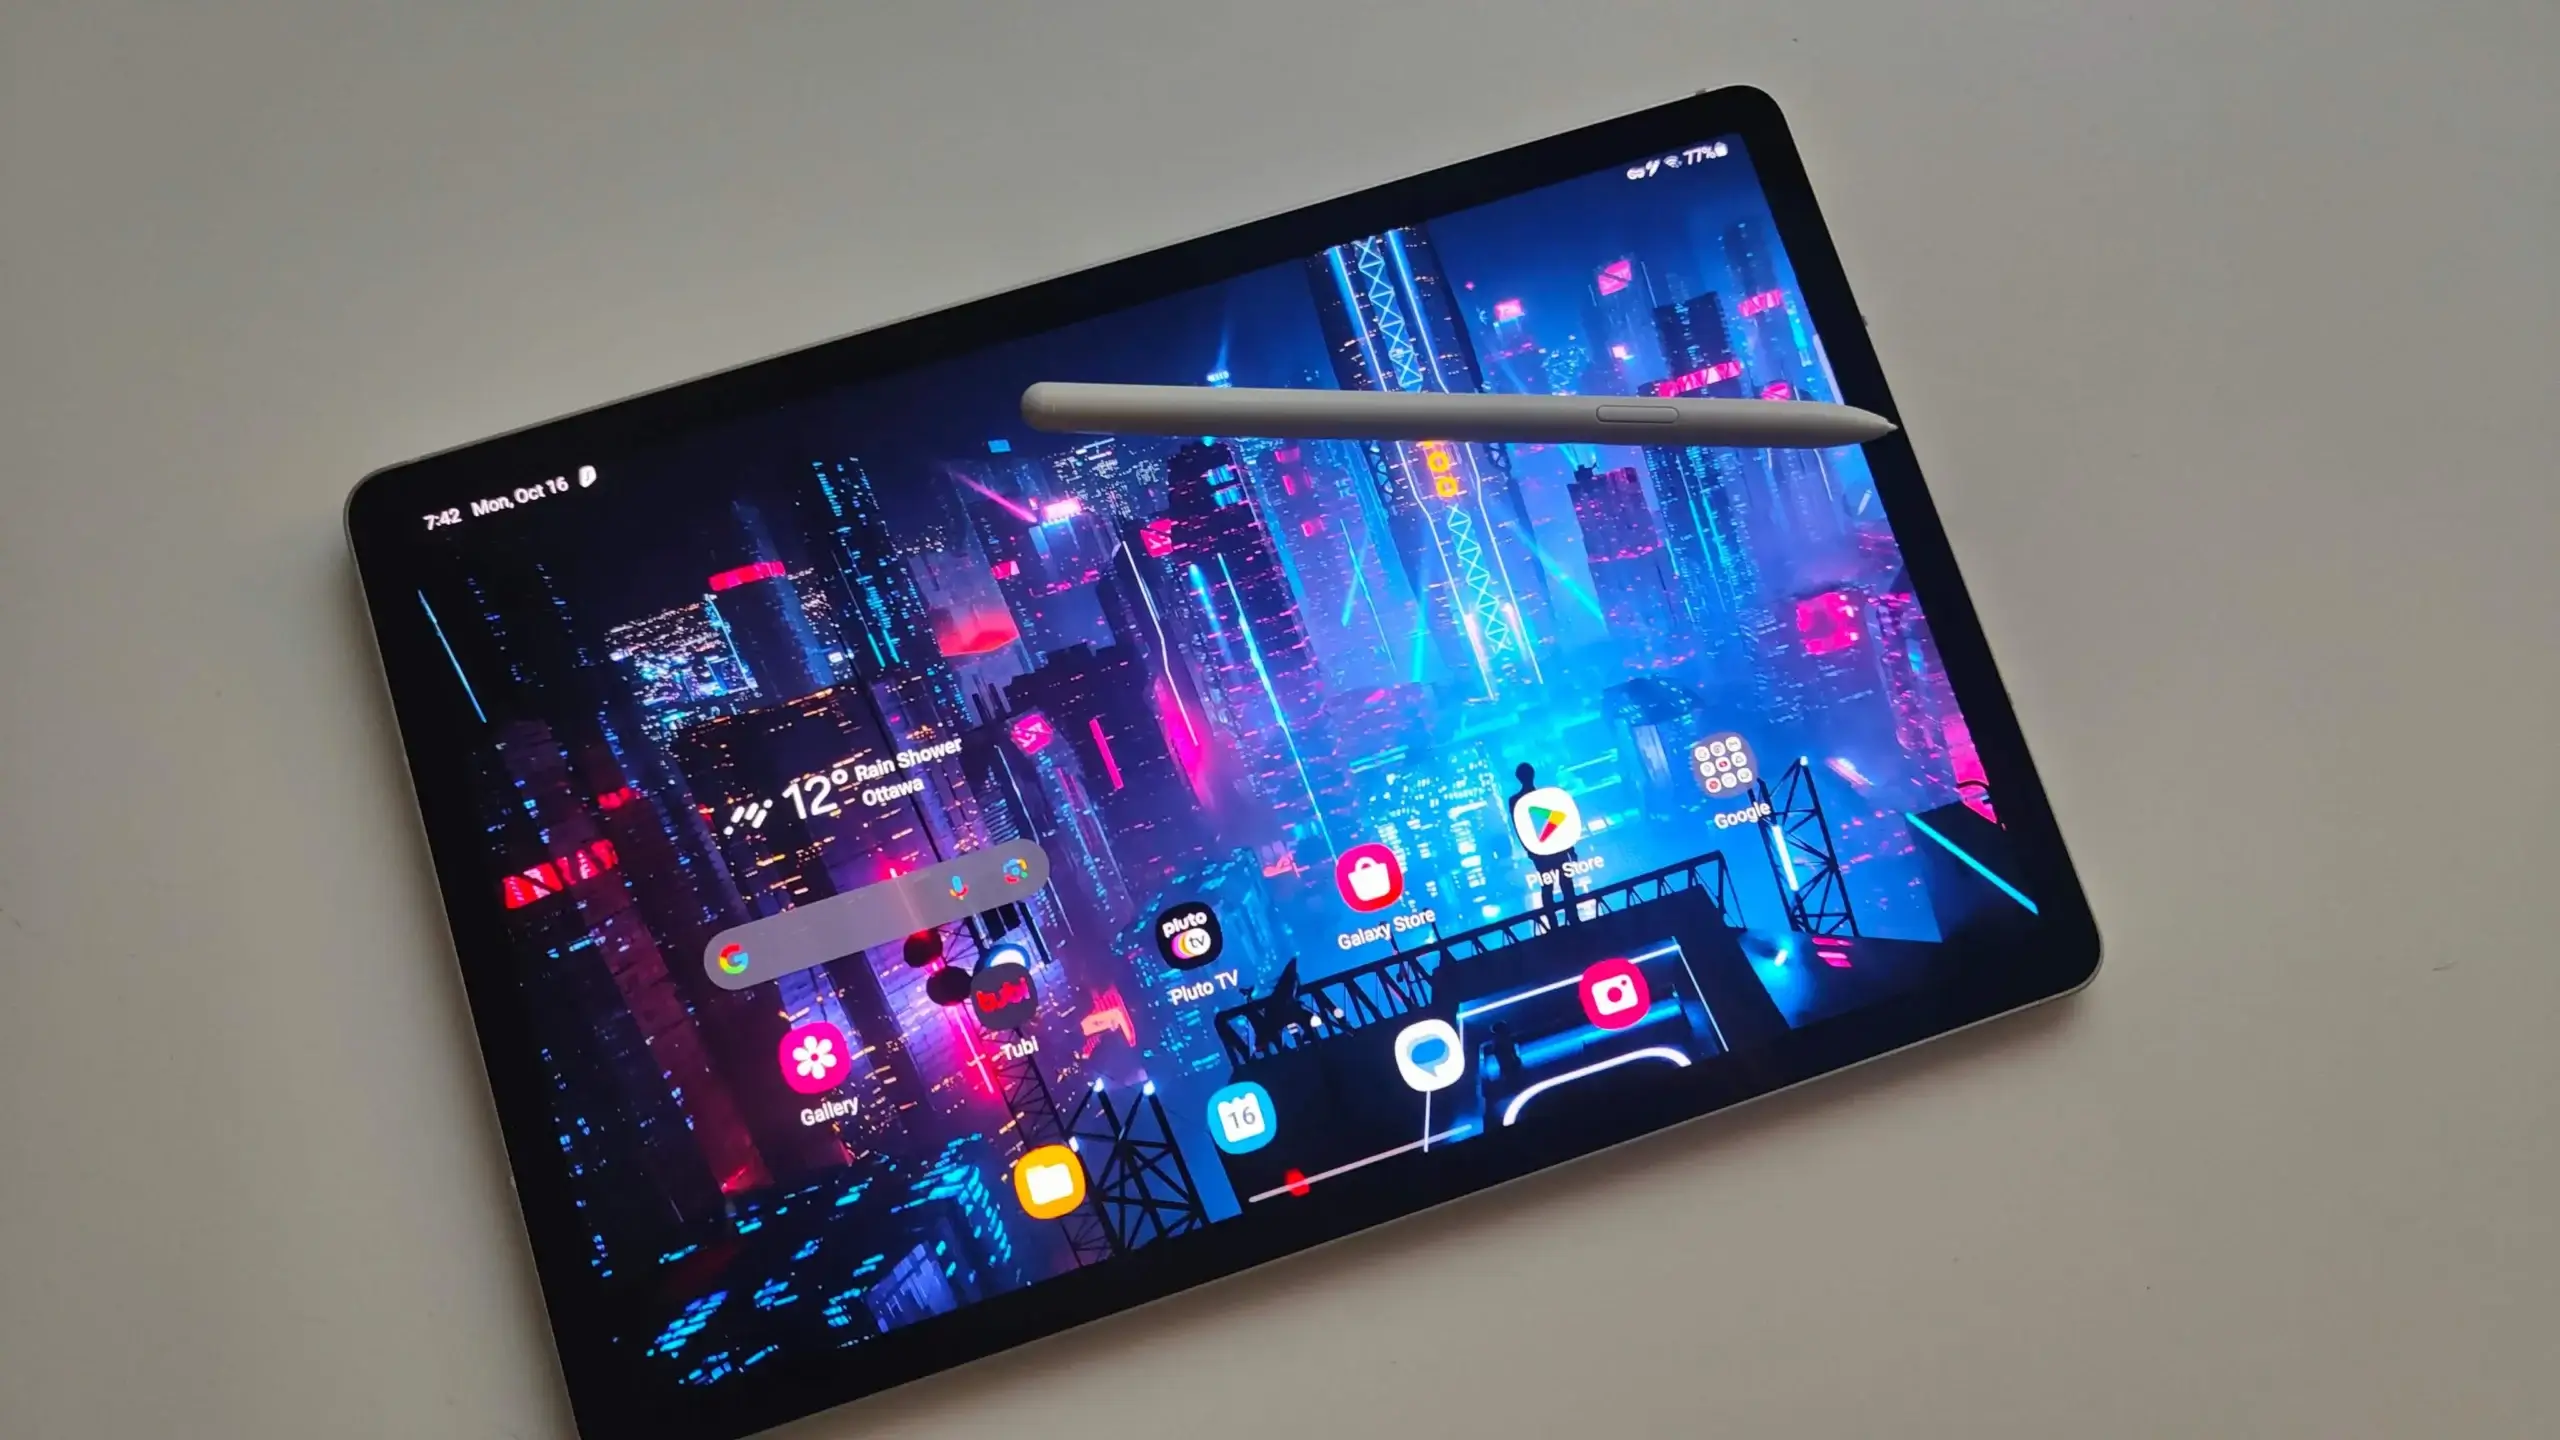 Galaxy Tab S9 homescreen with apps and wallpaper